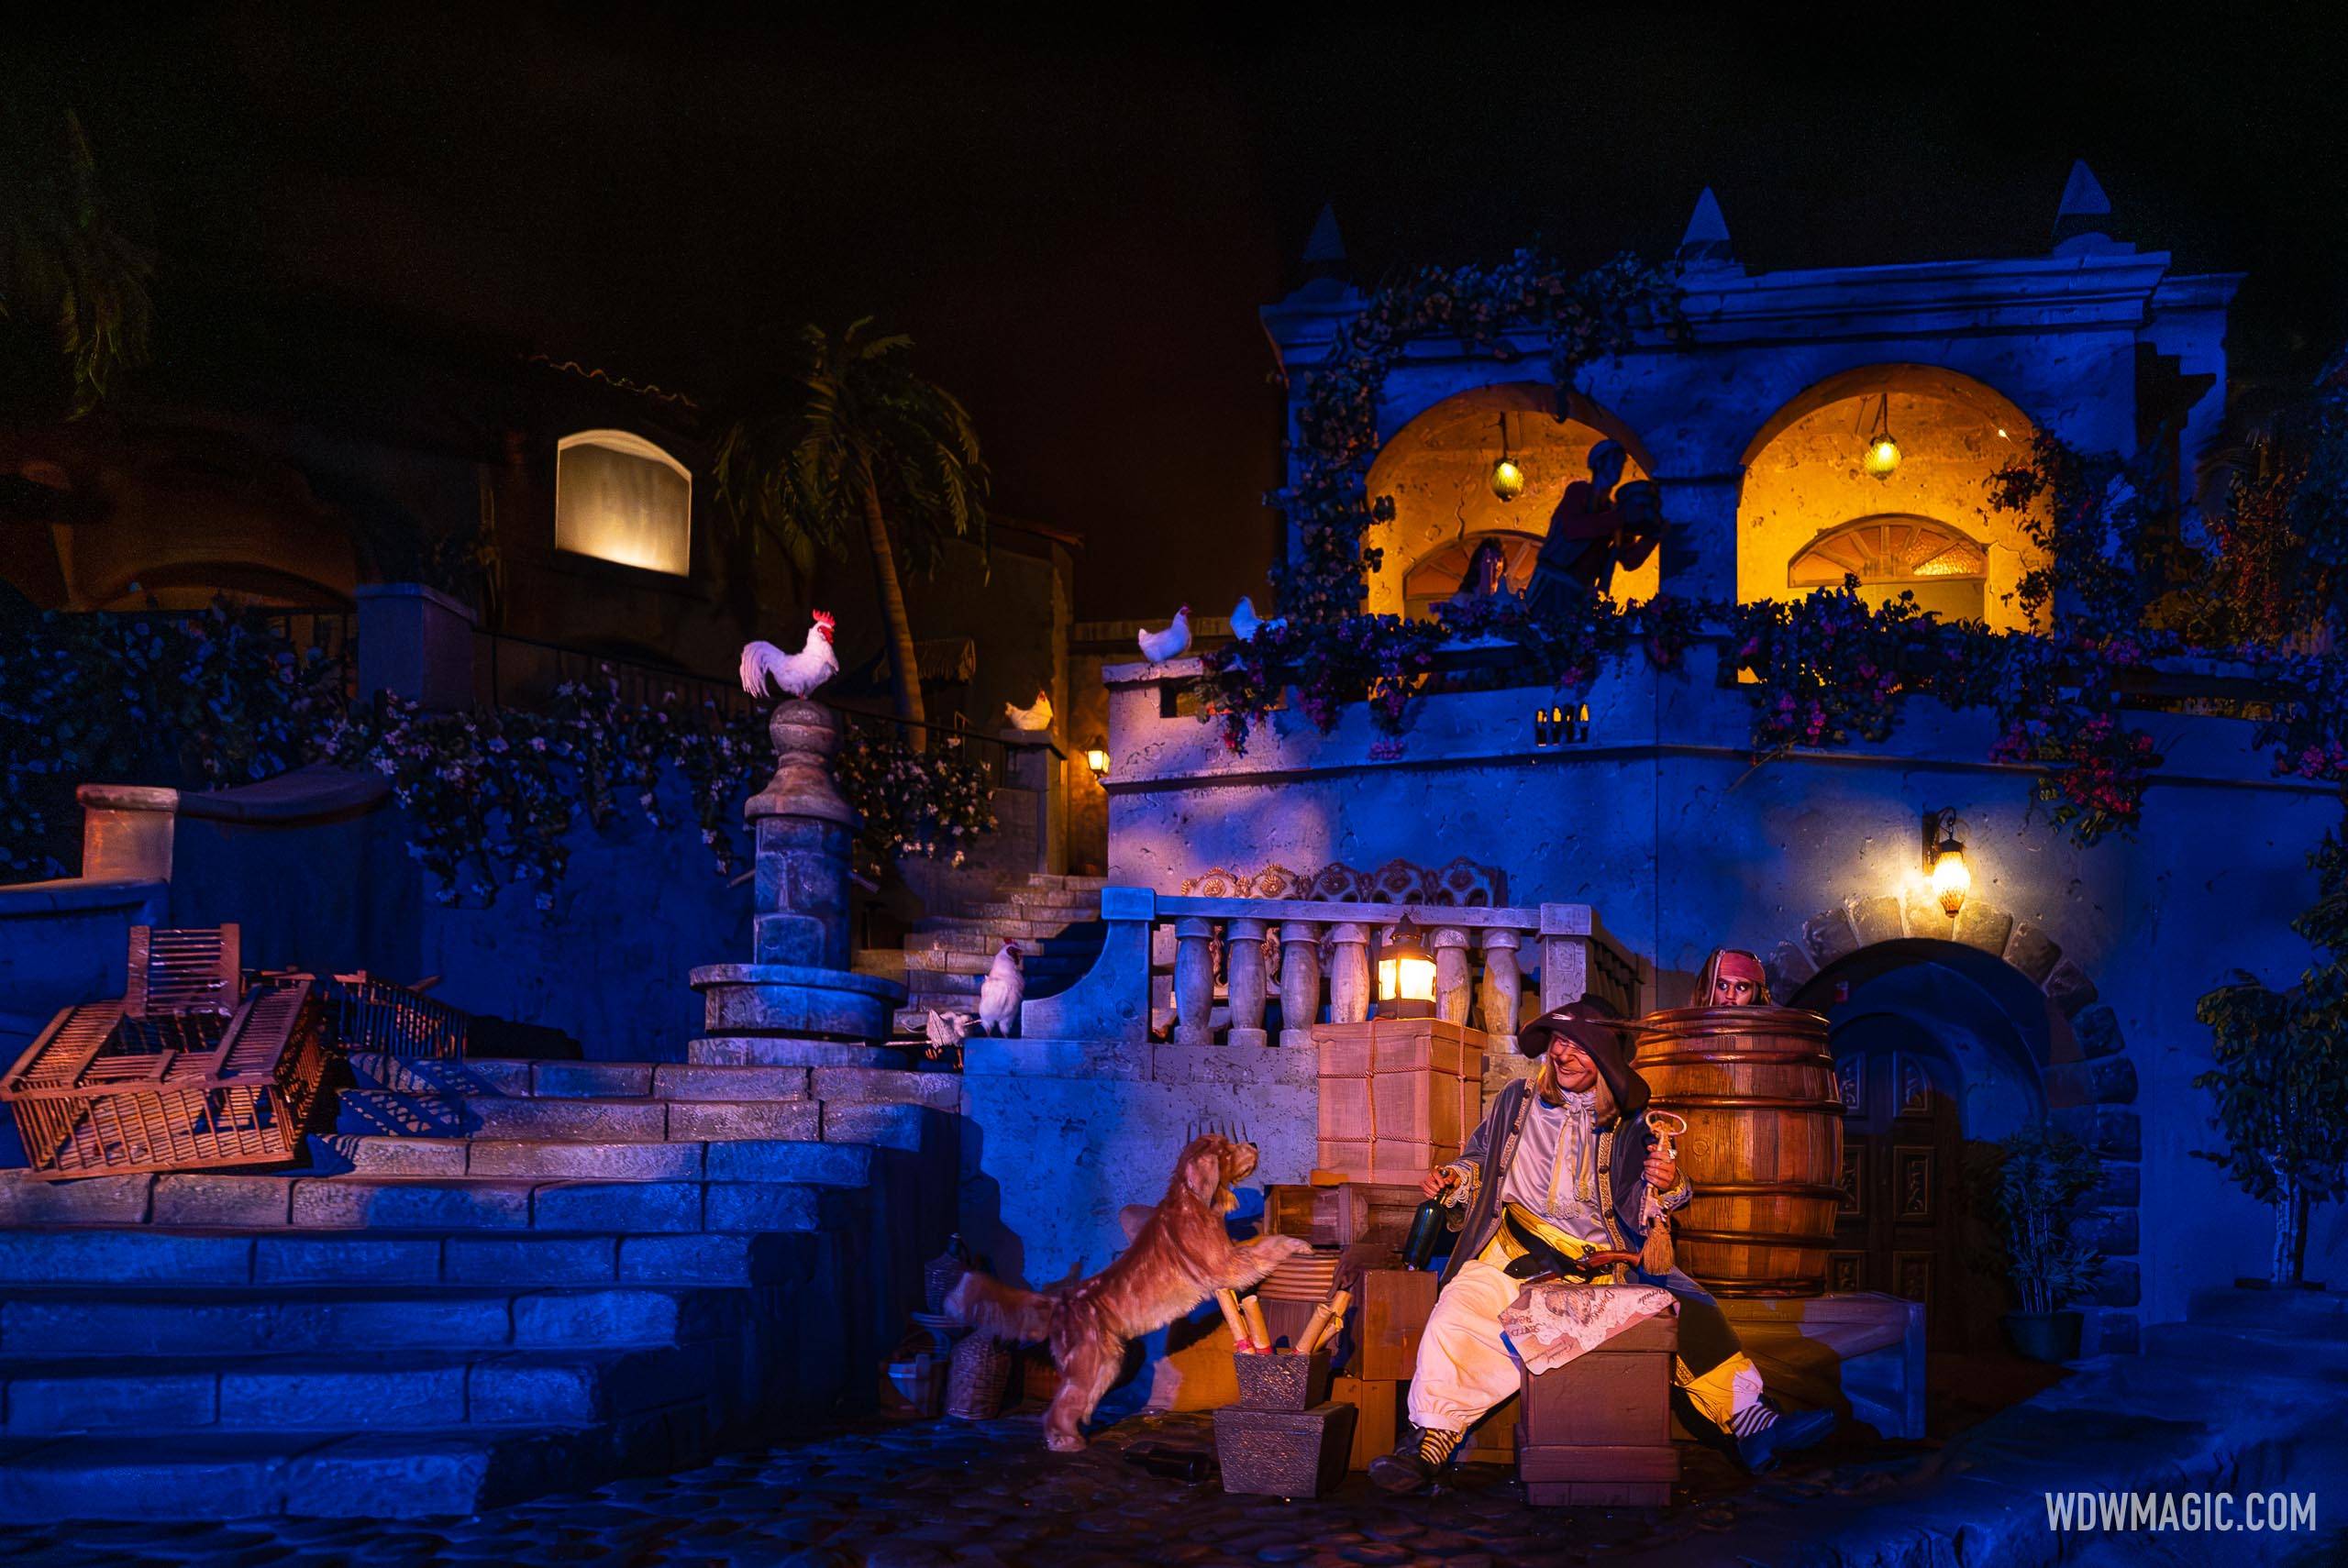 VIDEO - A look at the newly refurbished Pirates of the Caribbean